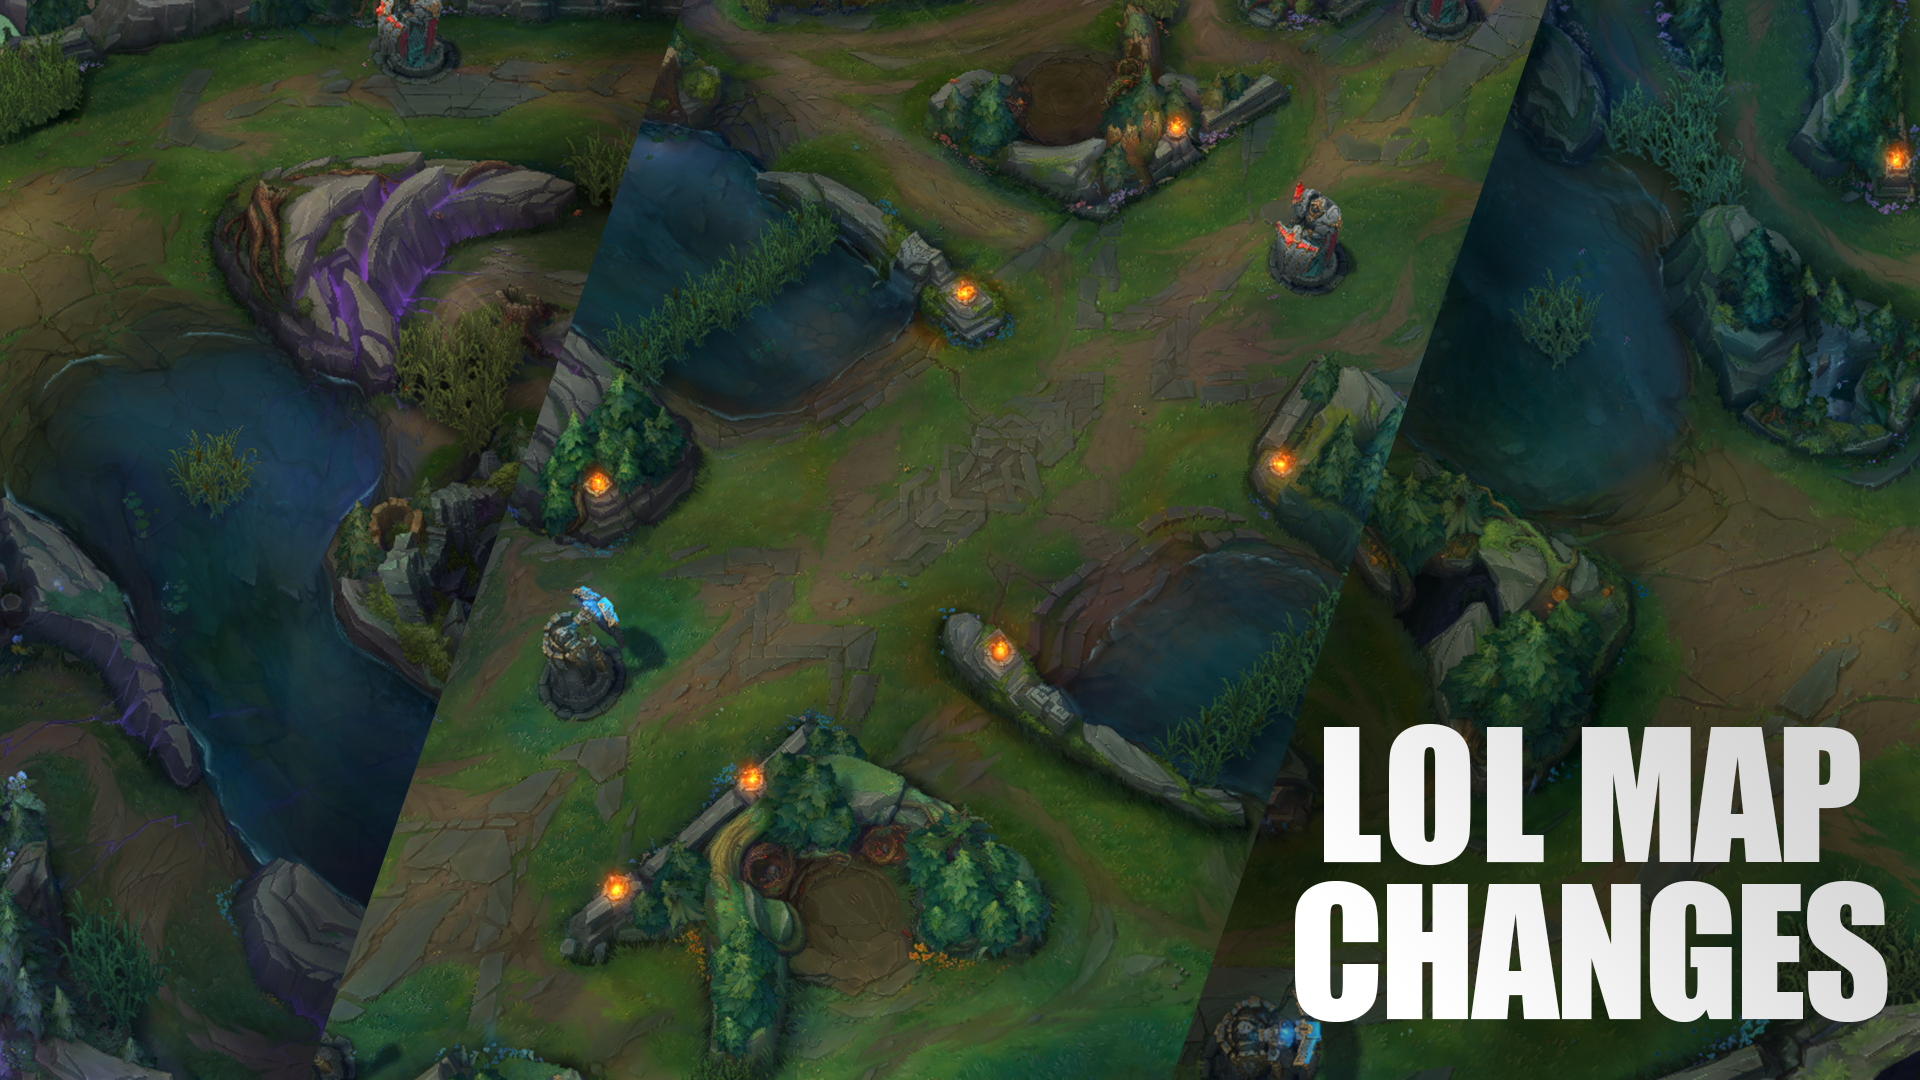 Everything you need to know about the LoL Map changes in Top, Mid, and Bot lane